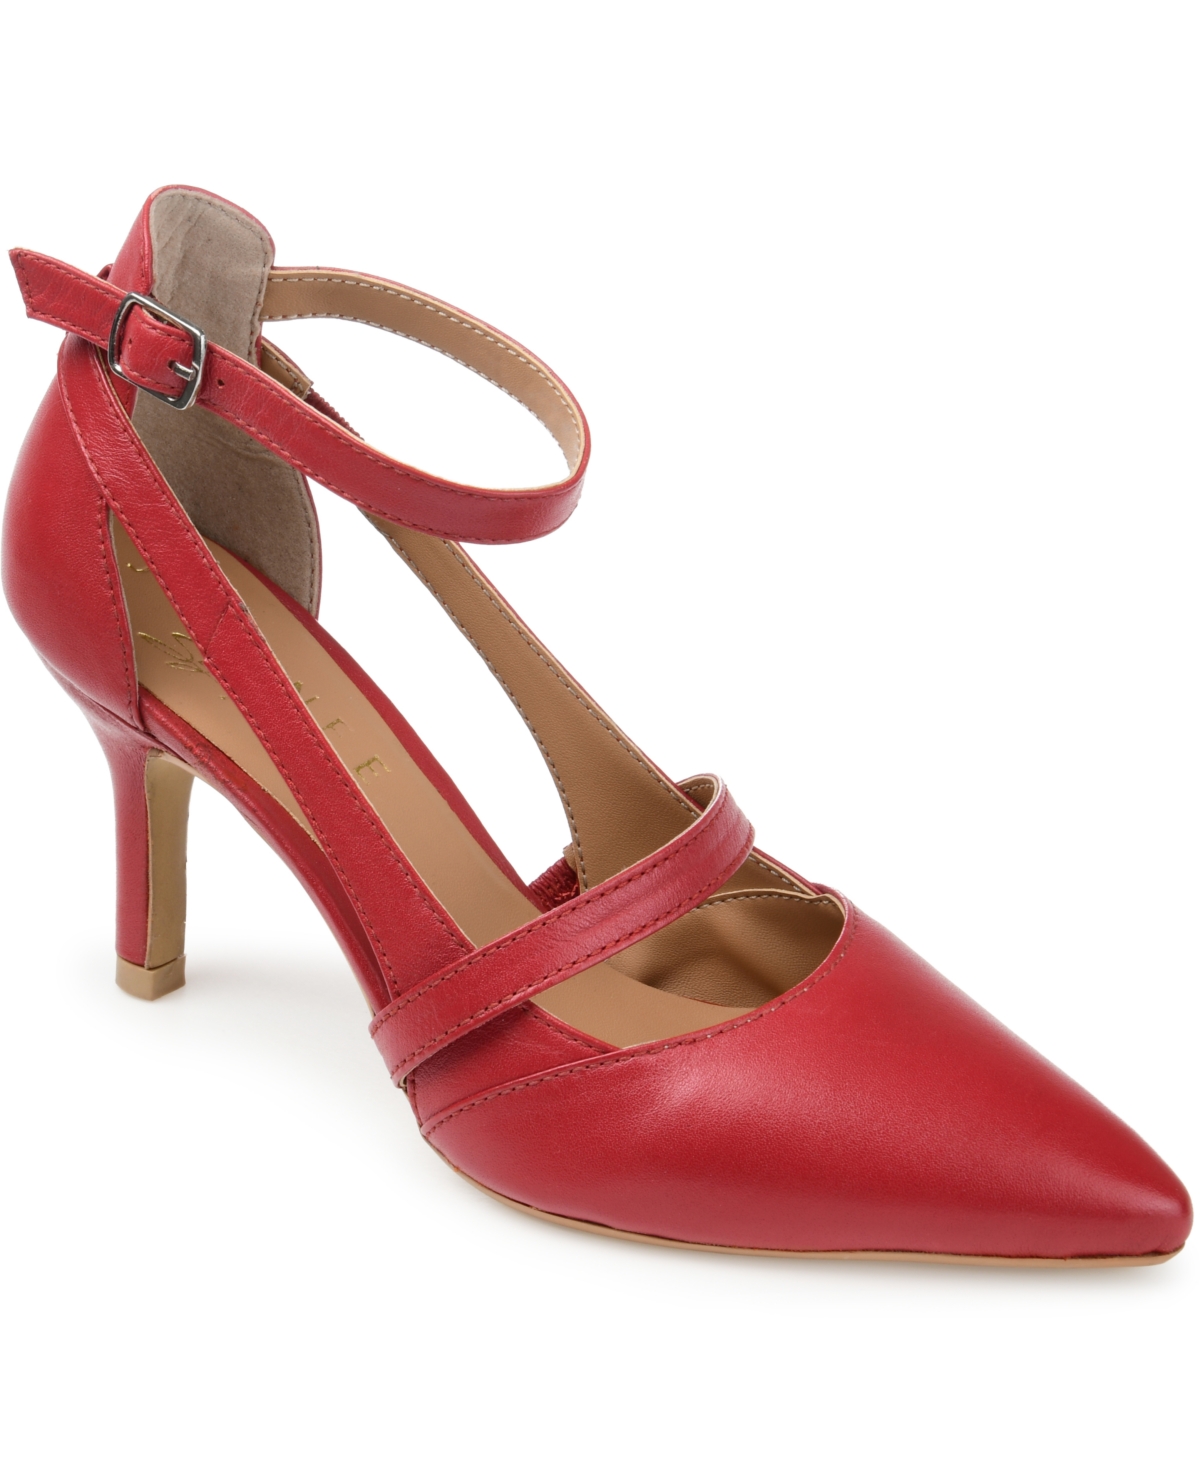 Women's Vallerie Ankle Strap Pumps - Red